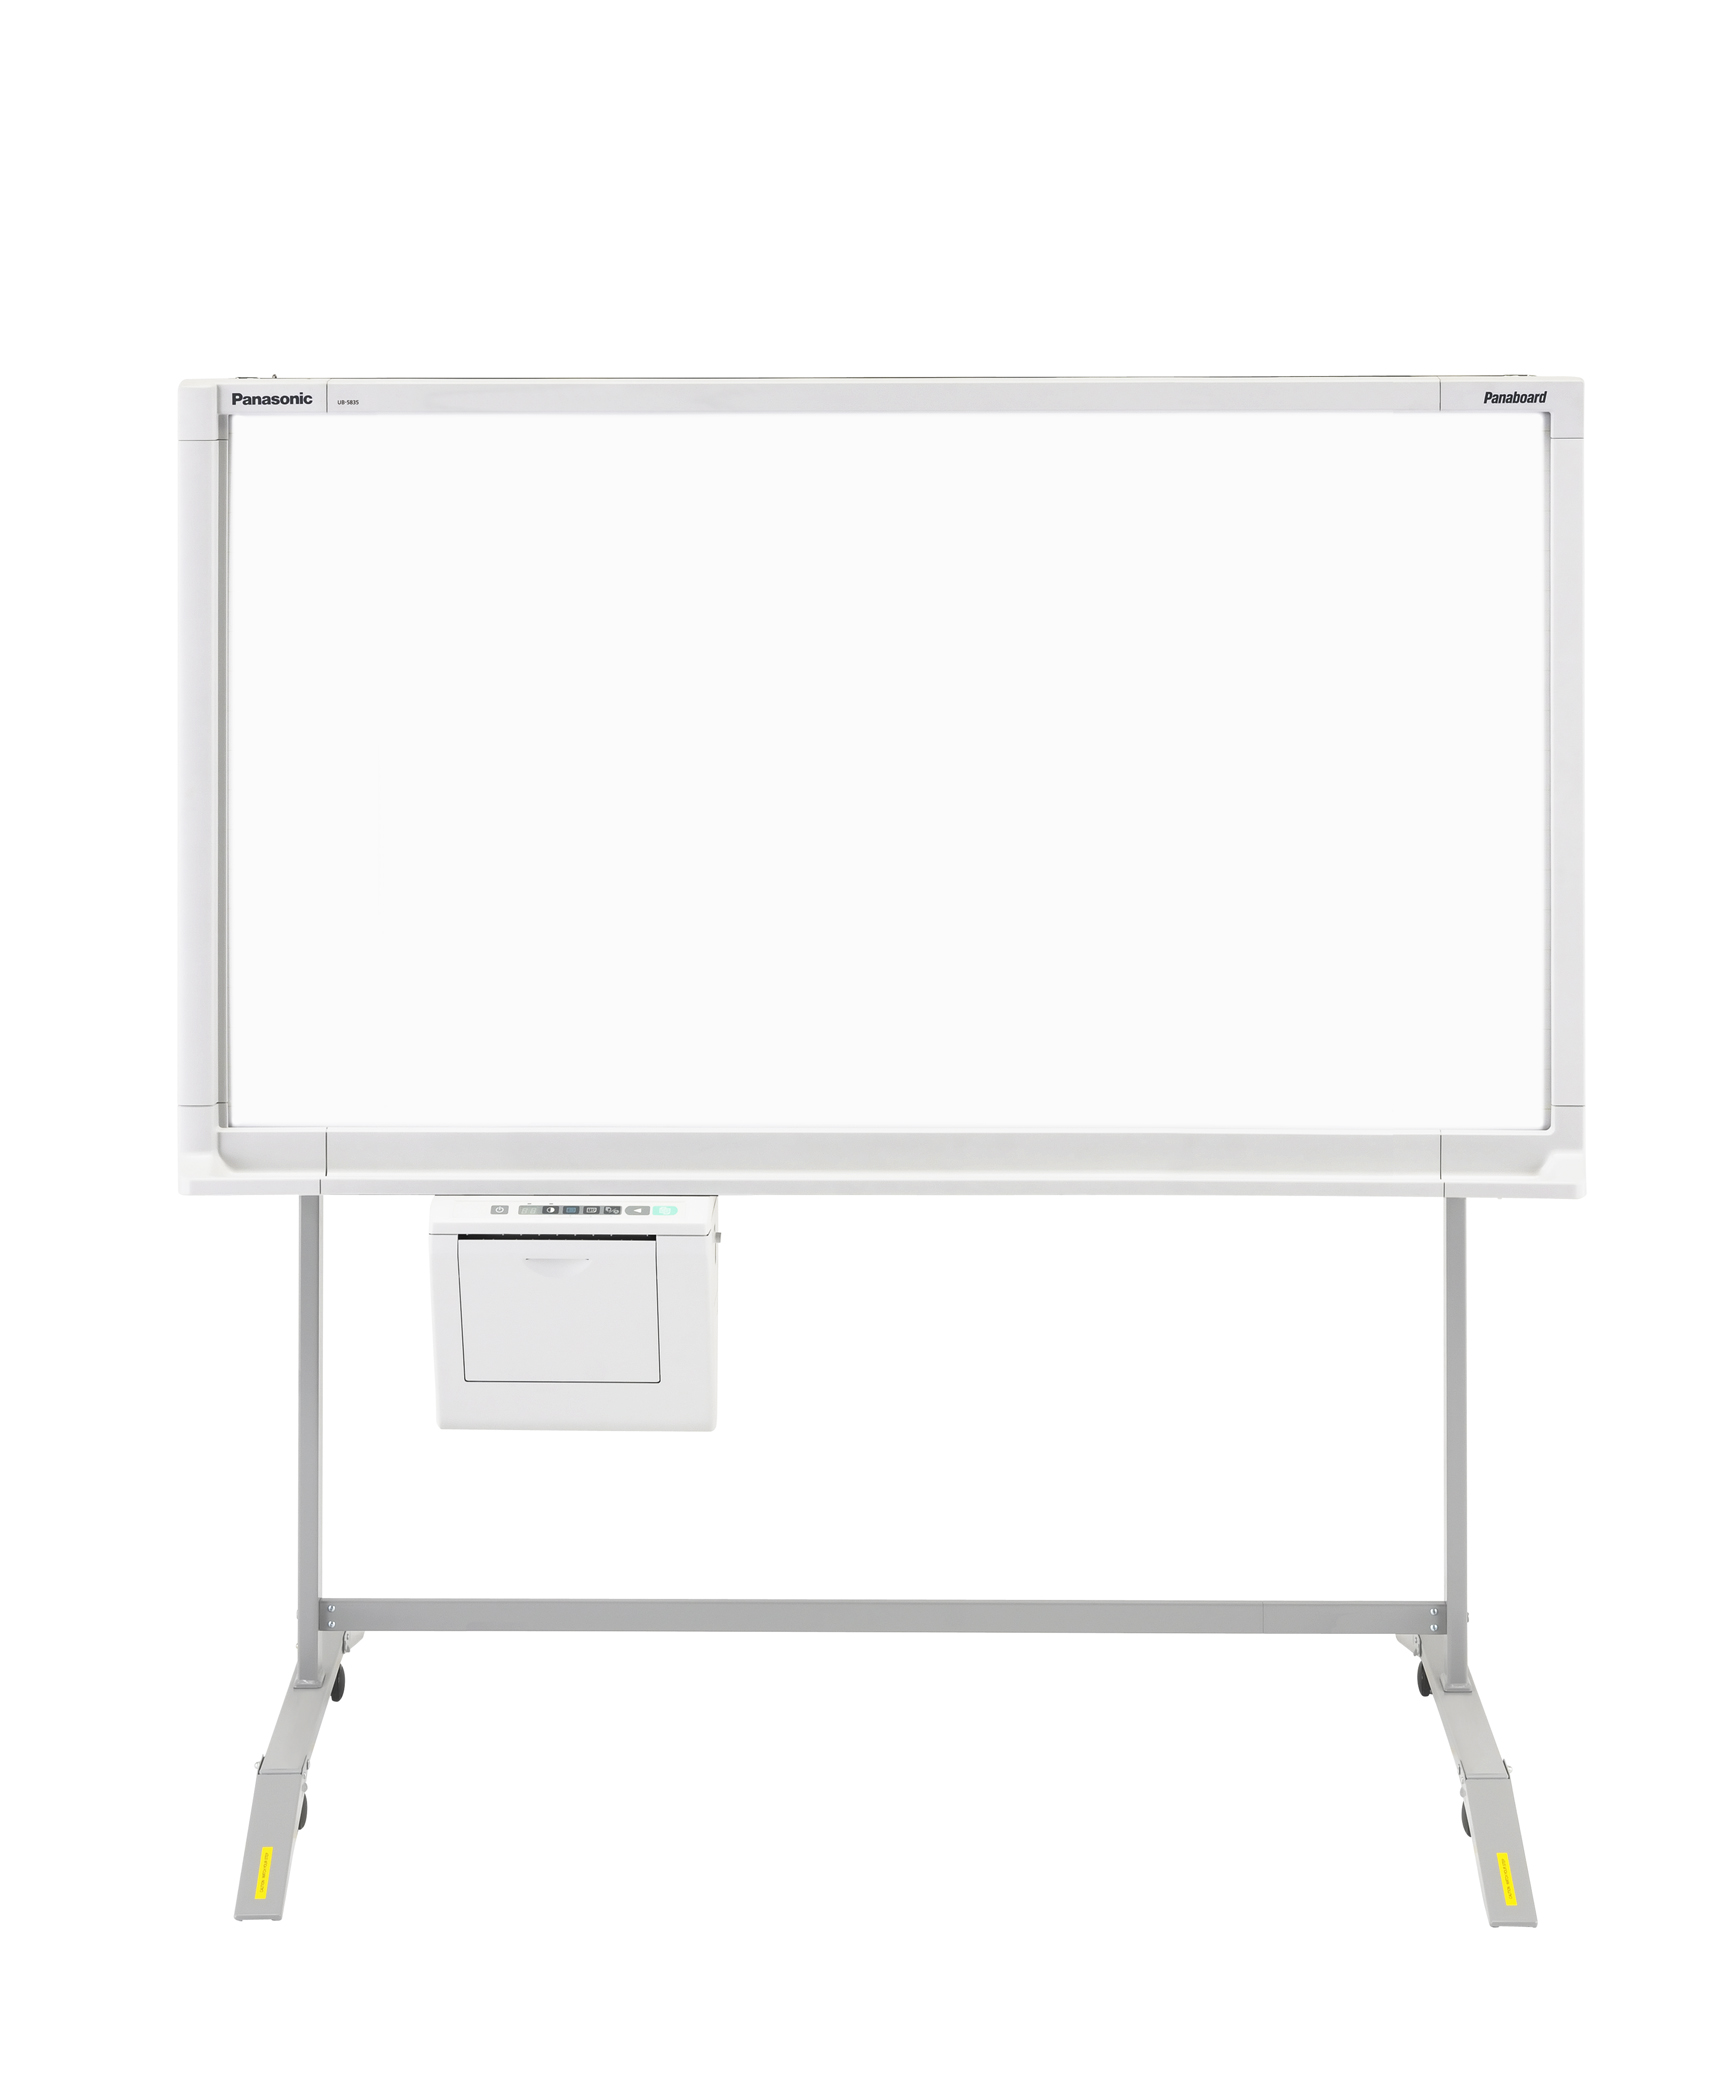 Panasonic rolls out its new electronic whiteboards for the Indian consumer